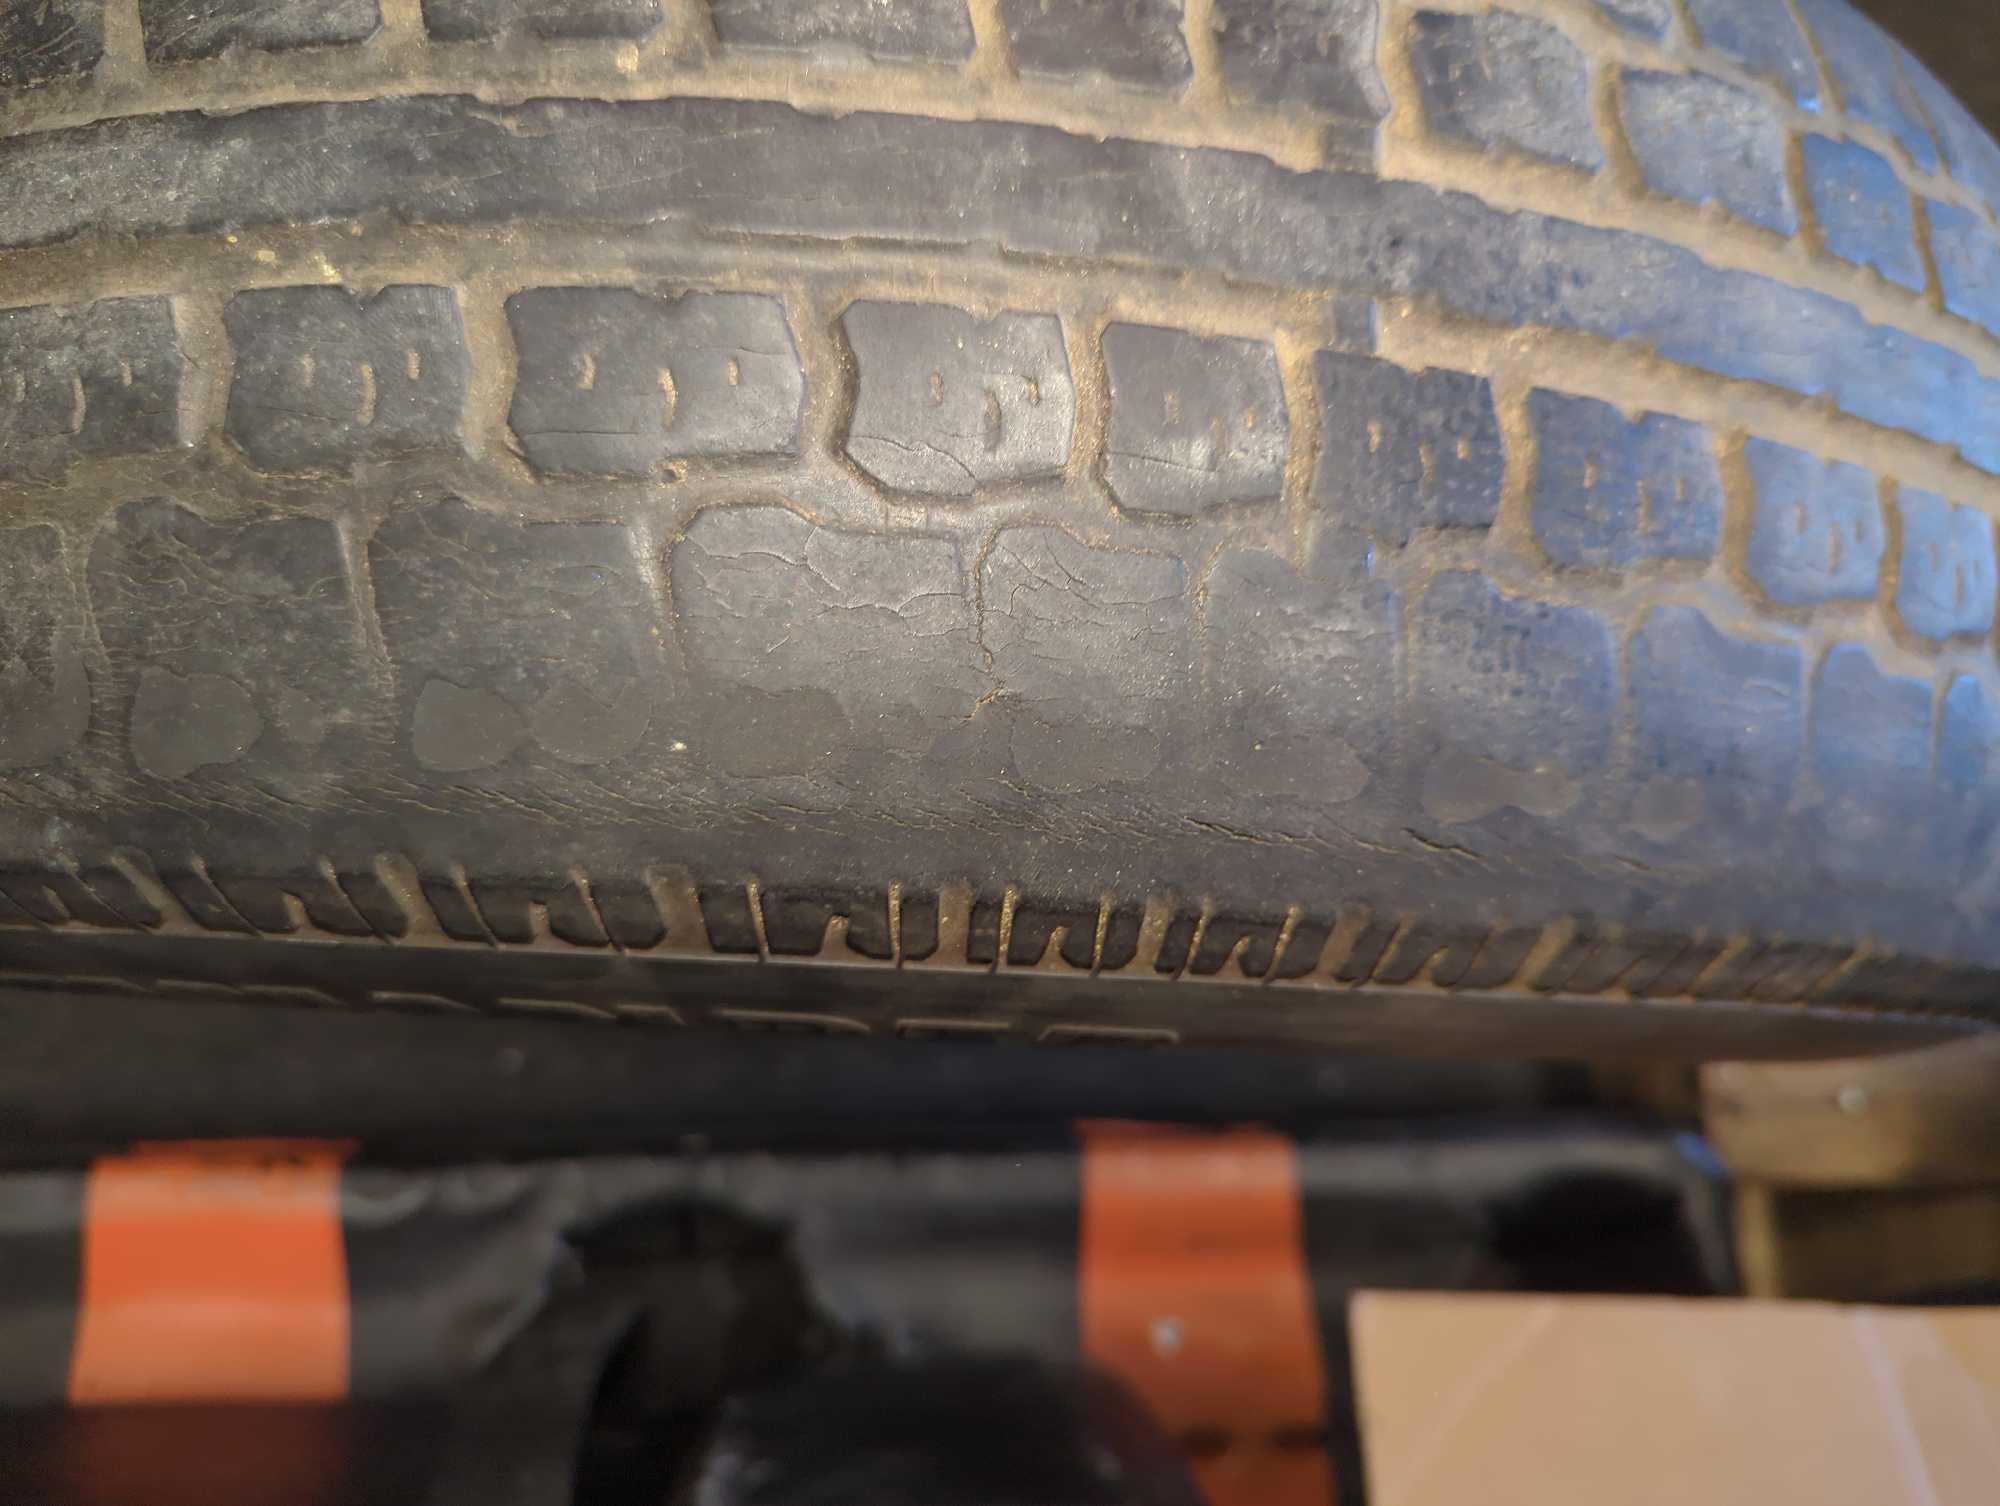 Commander Tire, P215/75R15, Tire is Bald in Some Places, Thread is Showing, Can be Used for Tire